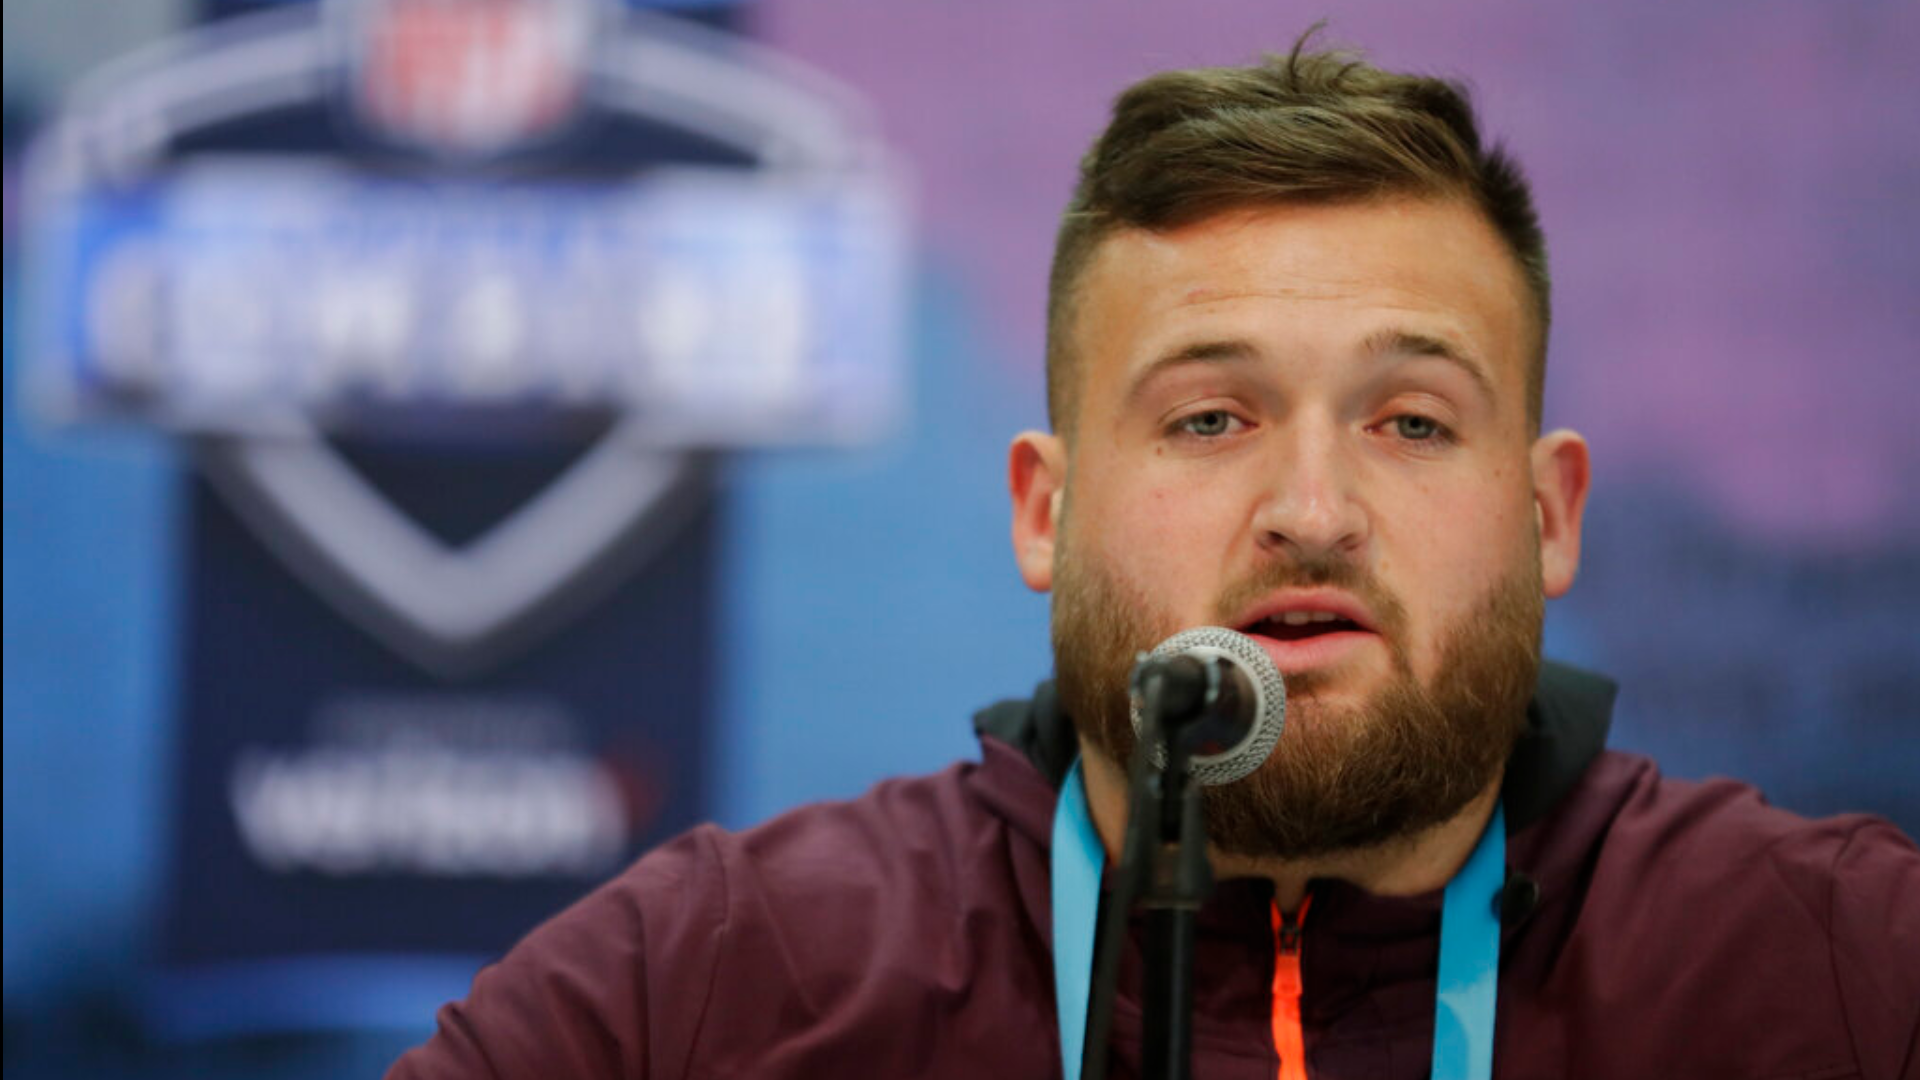 The likeable prospect is a big fan of Broncos assistant offensive line coach Chris Kuper